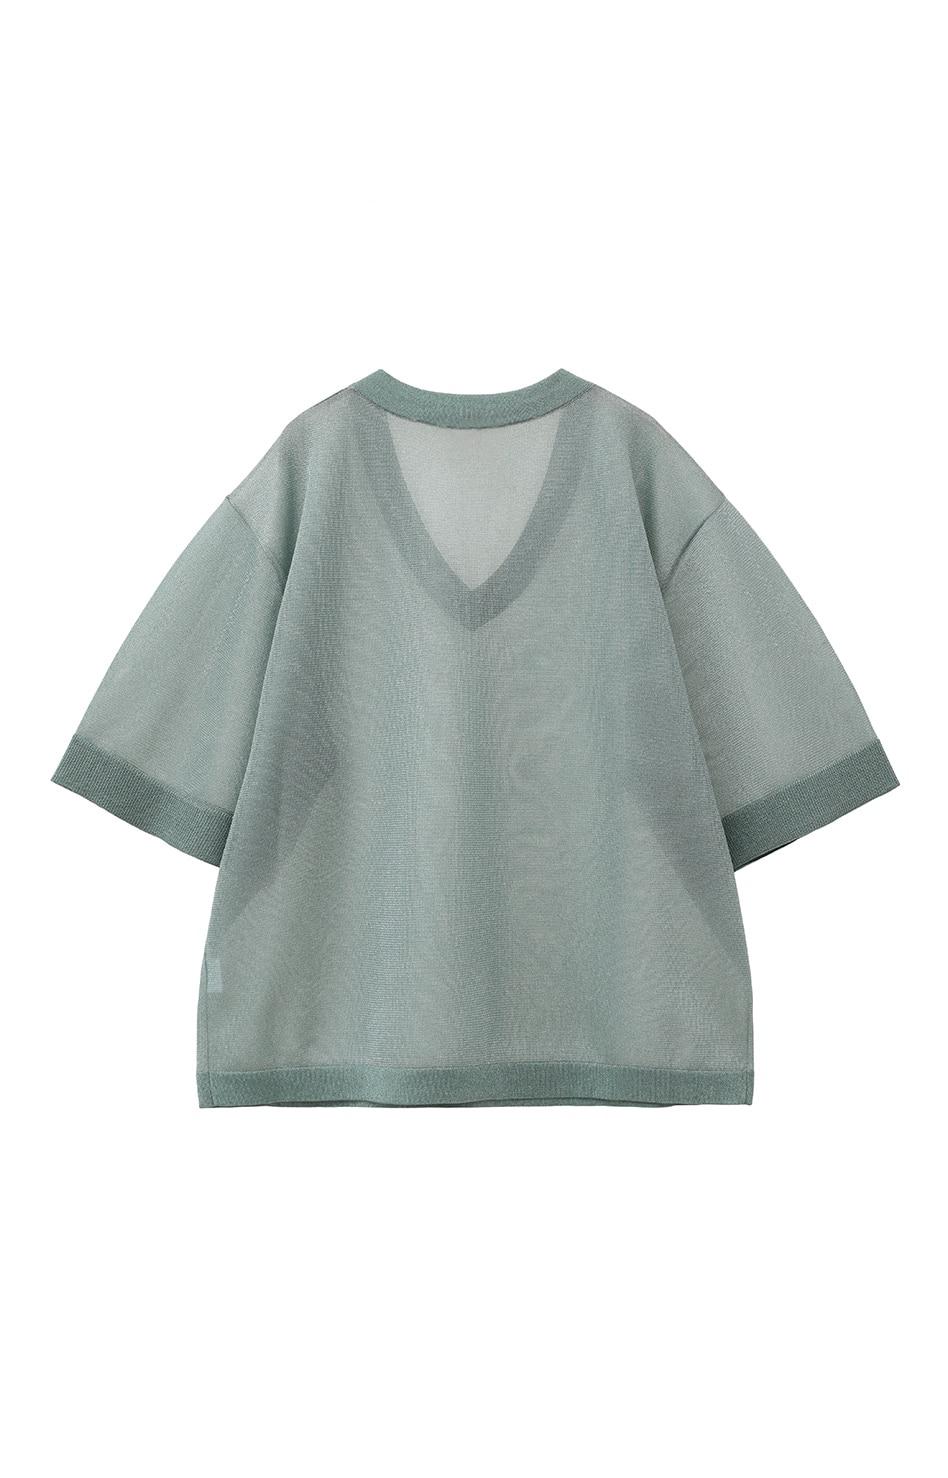 SHEER V NECK KNIT TOPS｜TOPS(トップス)｜CLANE OFFICIAL ONLINE STORE